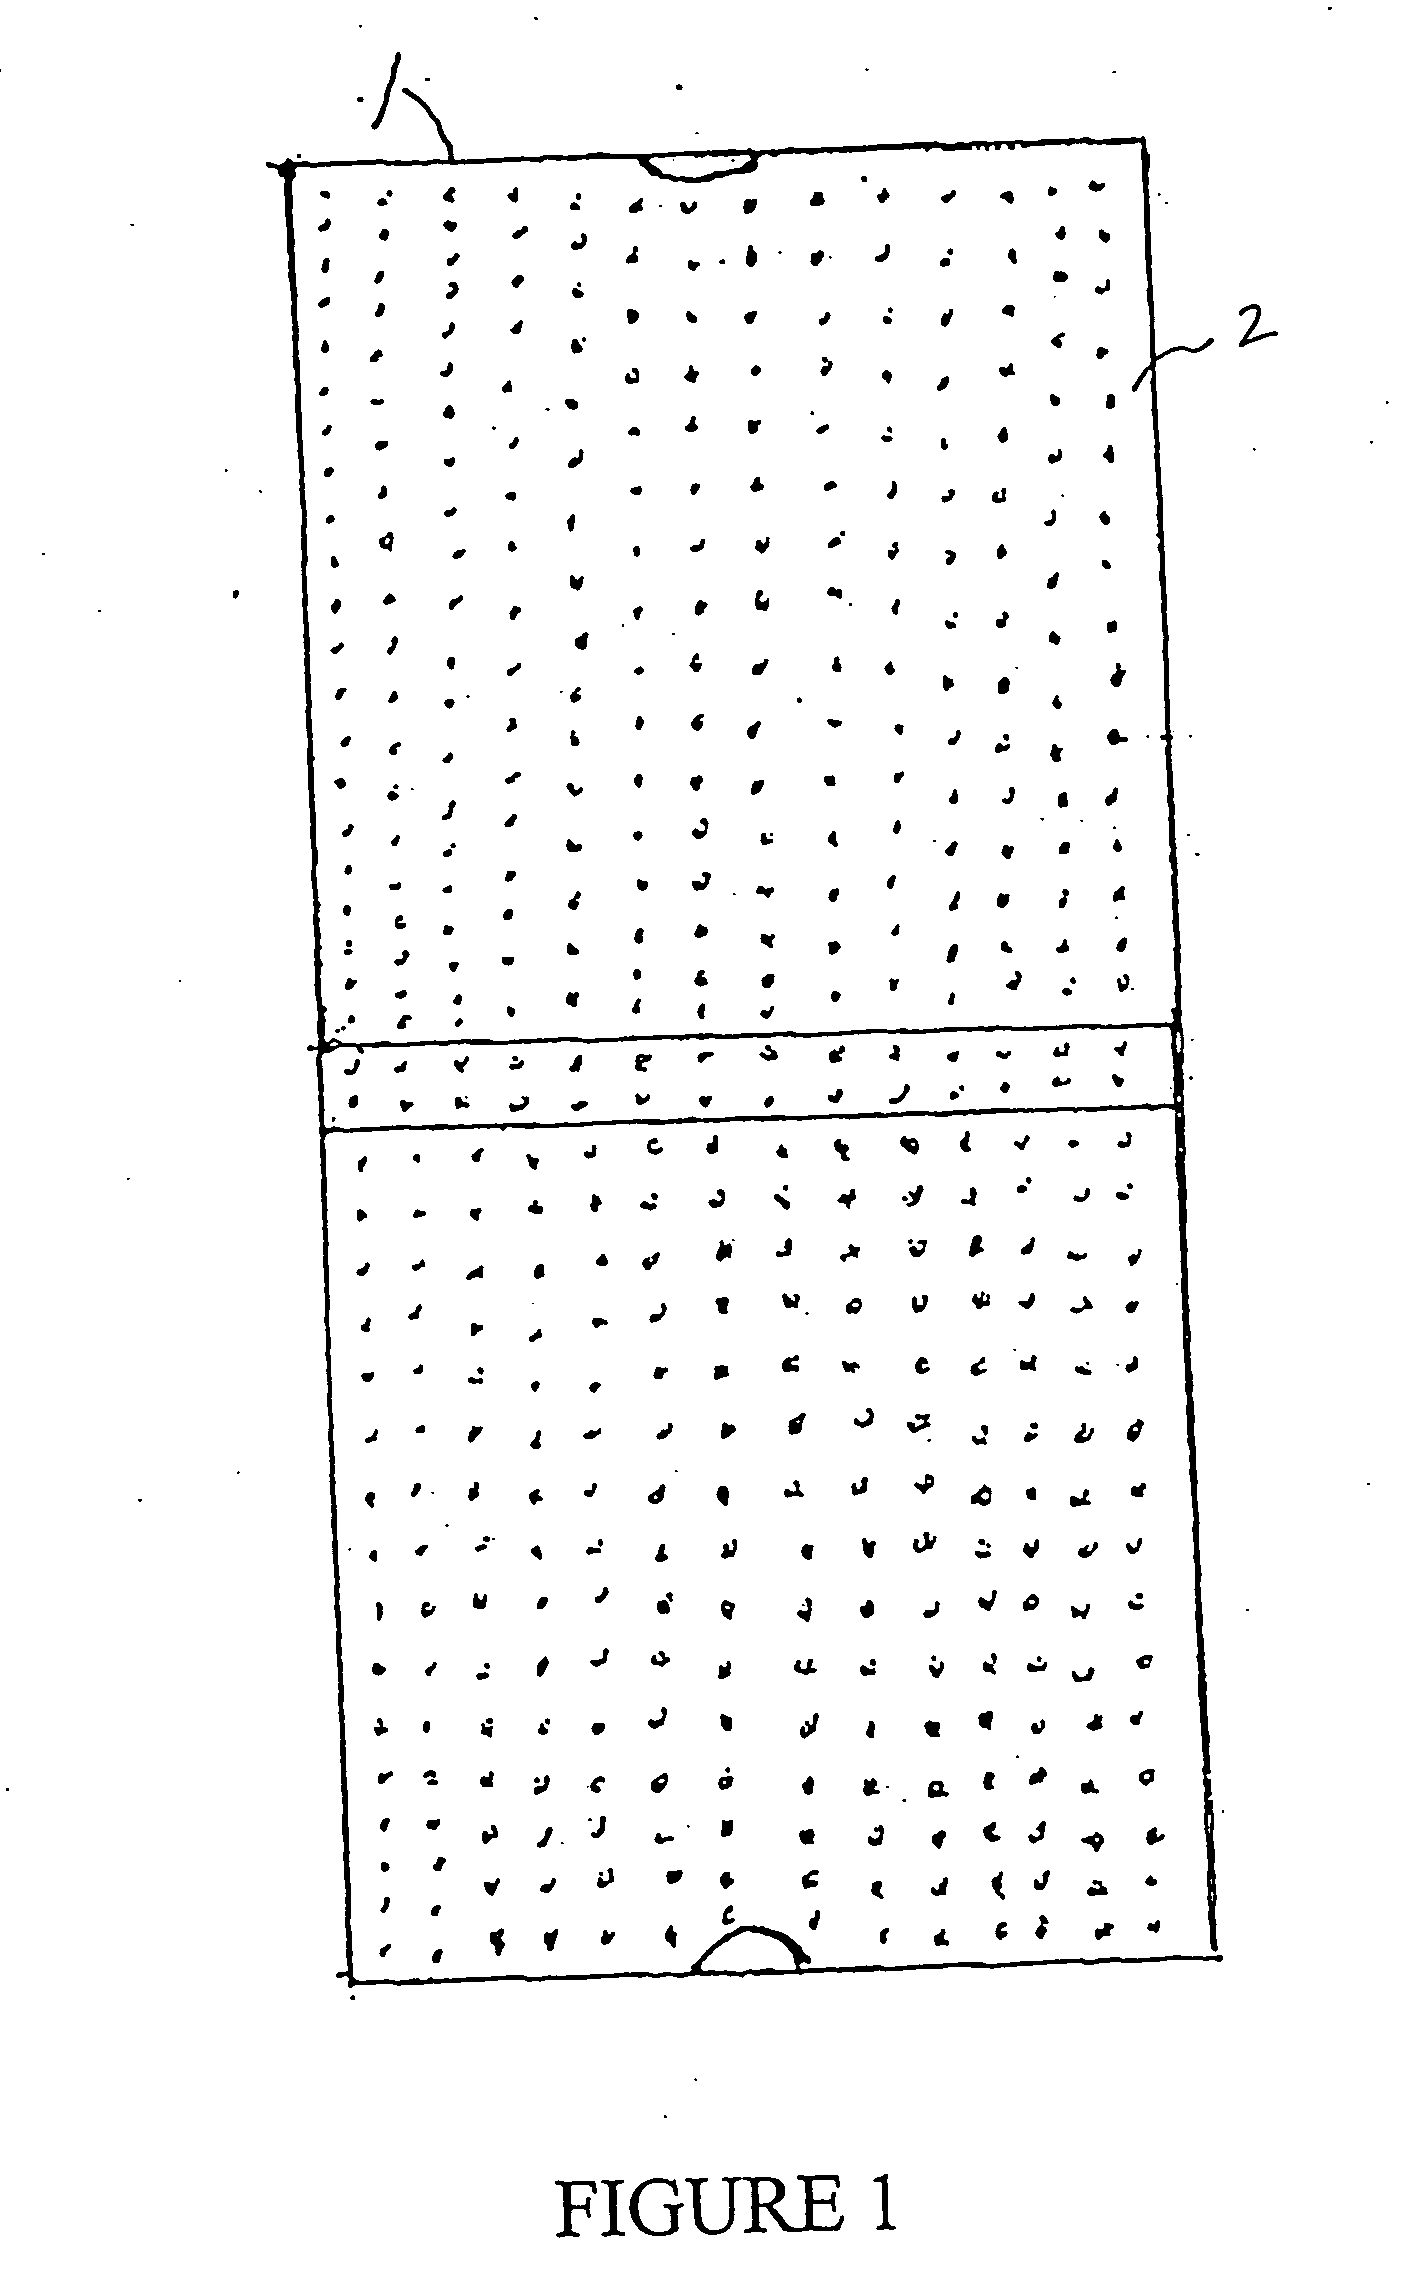 Packaging device and method for absorbing moisture